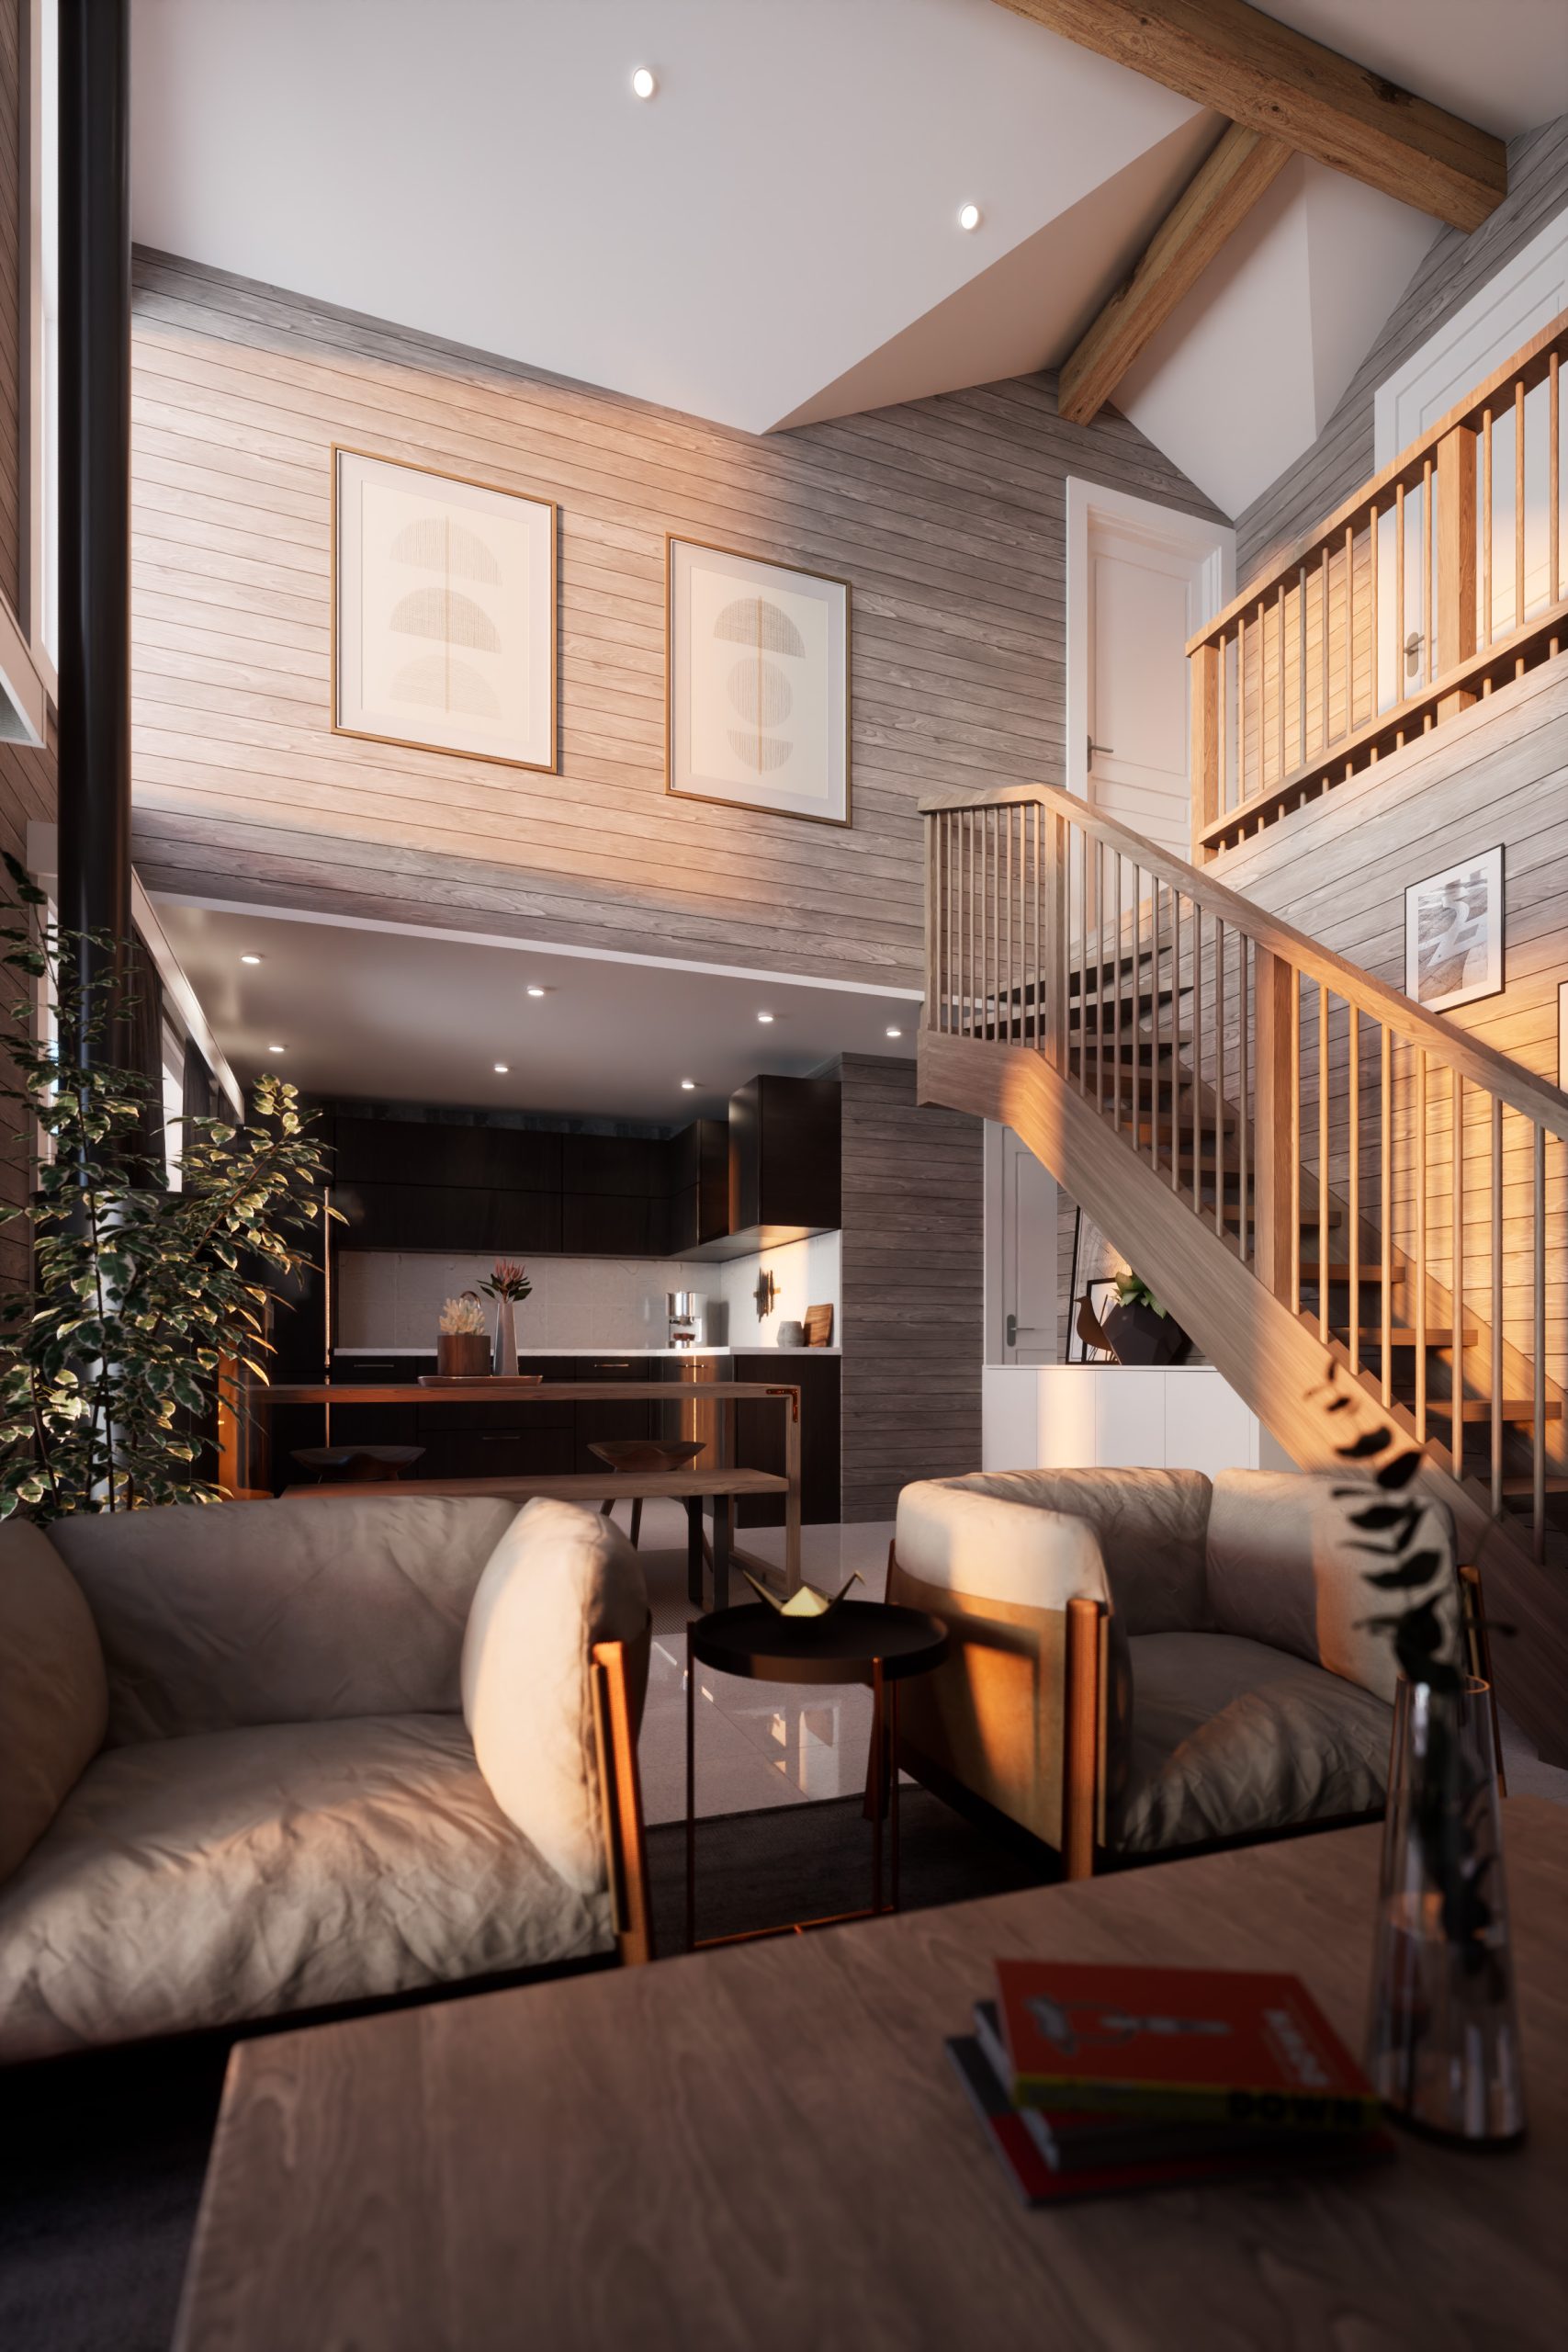 A photo realistic interior render of a modern Swedish ski cabin. This angle shows how the light shines through the tall windows, and the beautiful wooden staircase leading up to the loft.